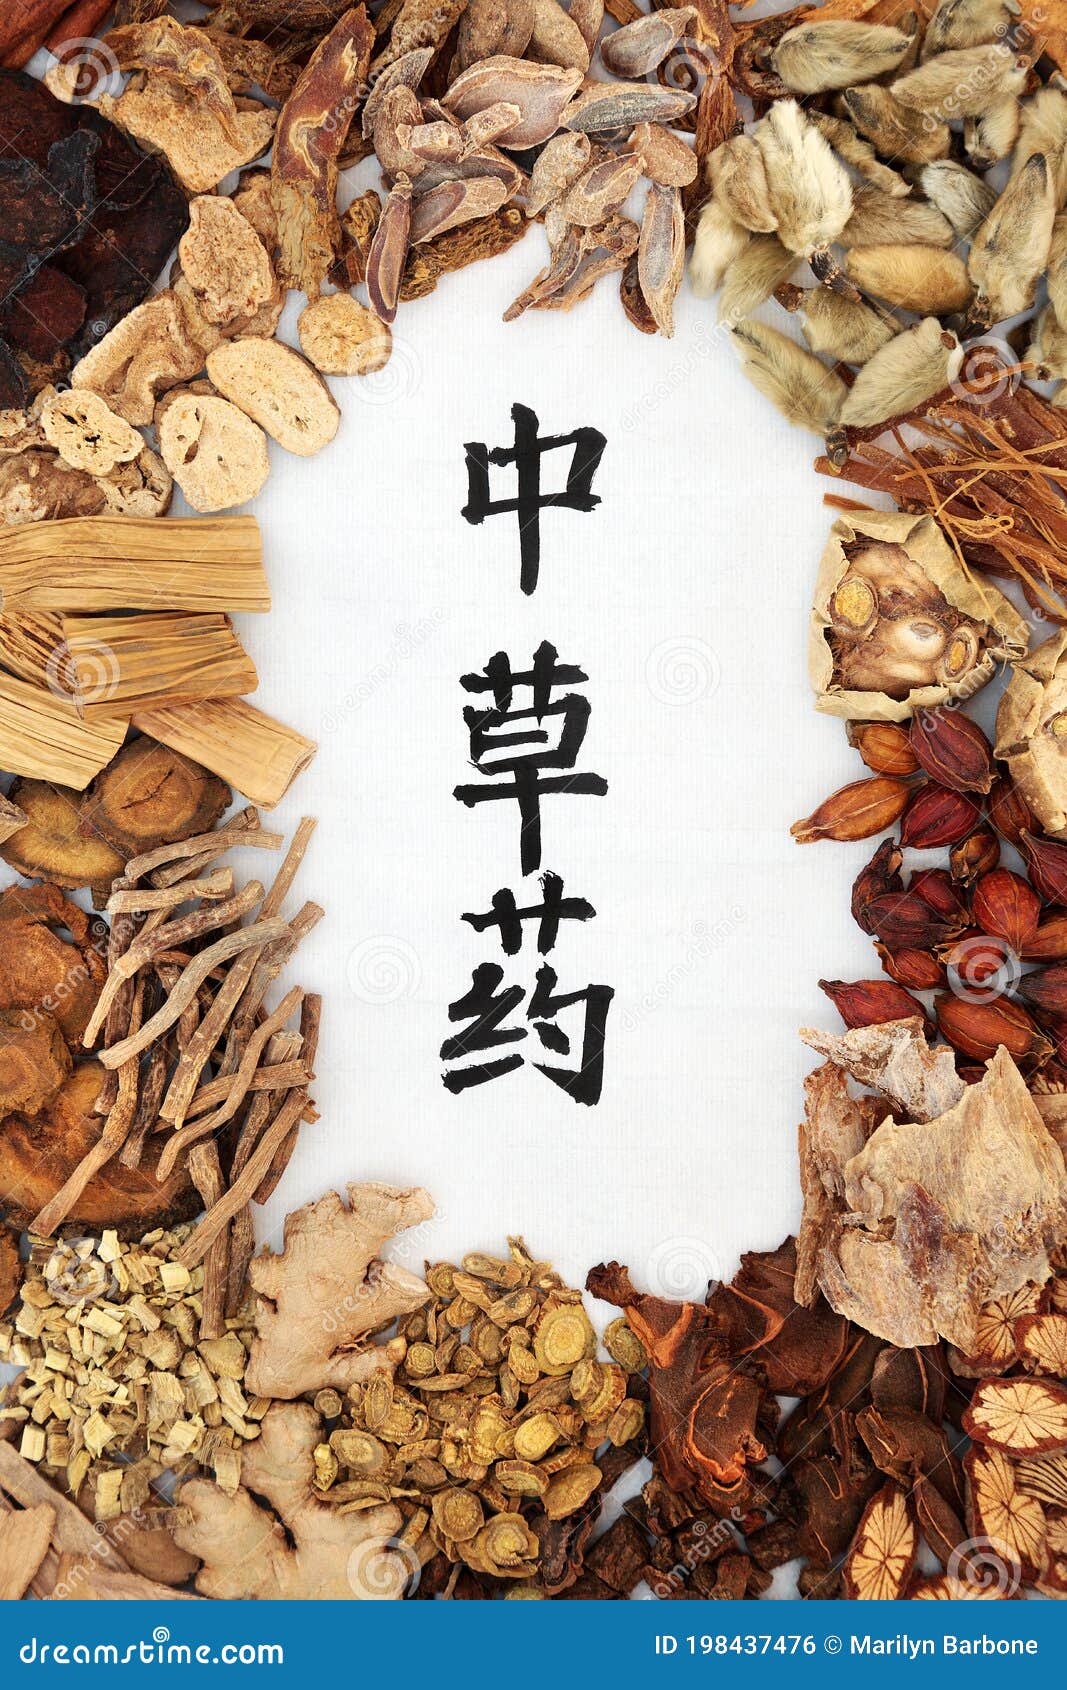 chinese healing herbs for herbal medicine